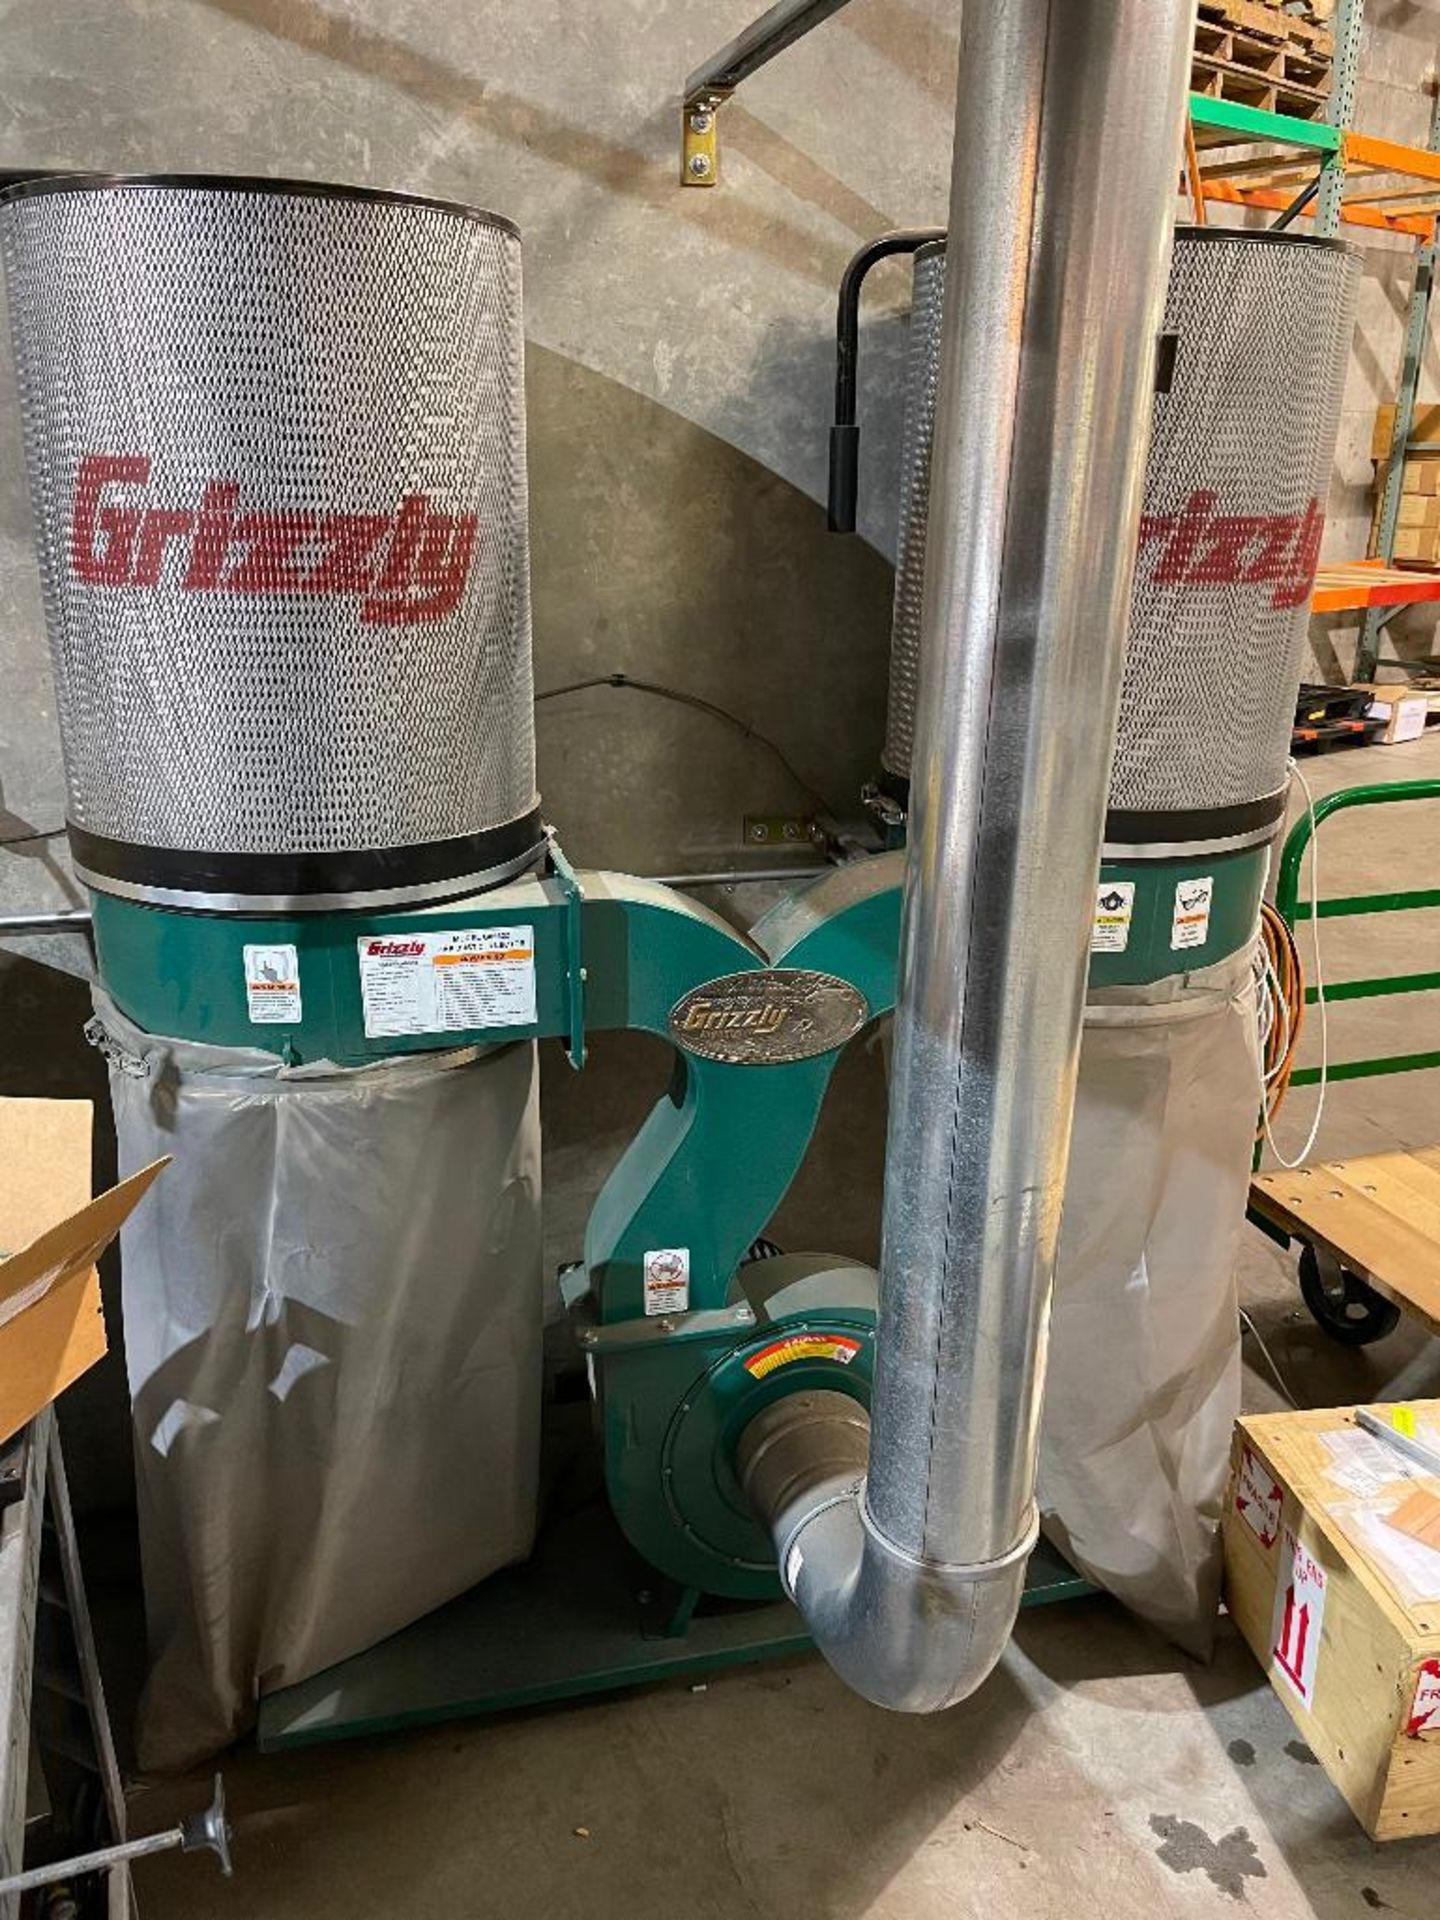 DESCRIPTION: GRIZZLY 3 HP DUST COLLECTOR W/ HOOD SYSTEM BRAND / MODEL: GRIZZLY G0562Z ADDITIONAL INF